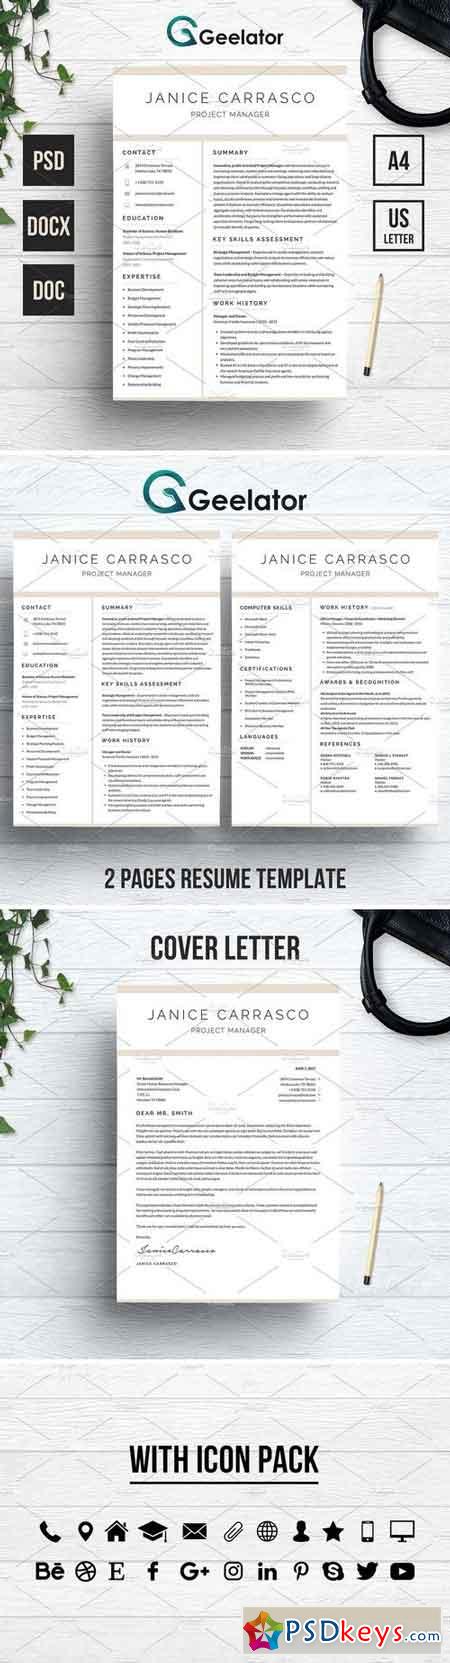 Resume Template 3 Pages 1554518